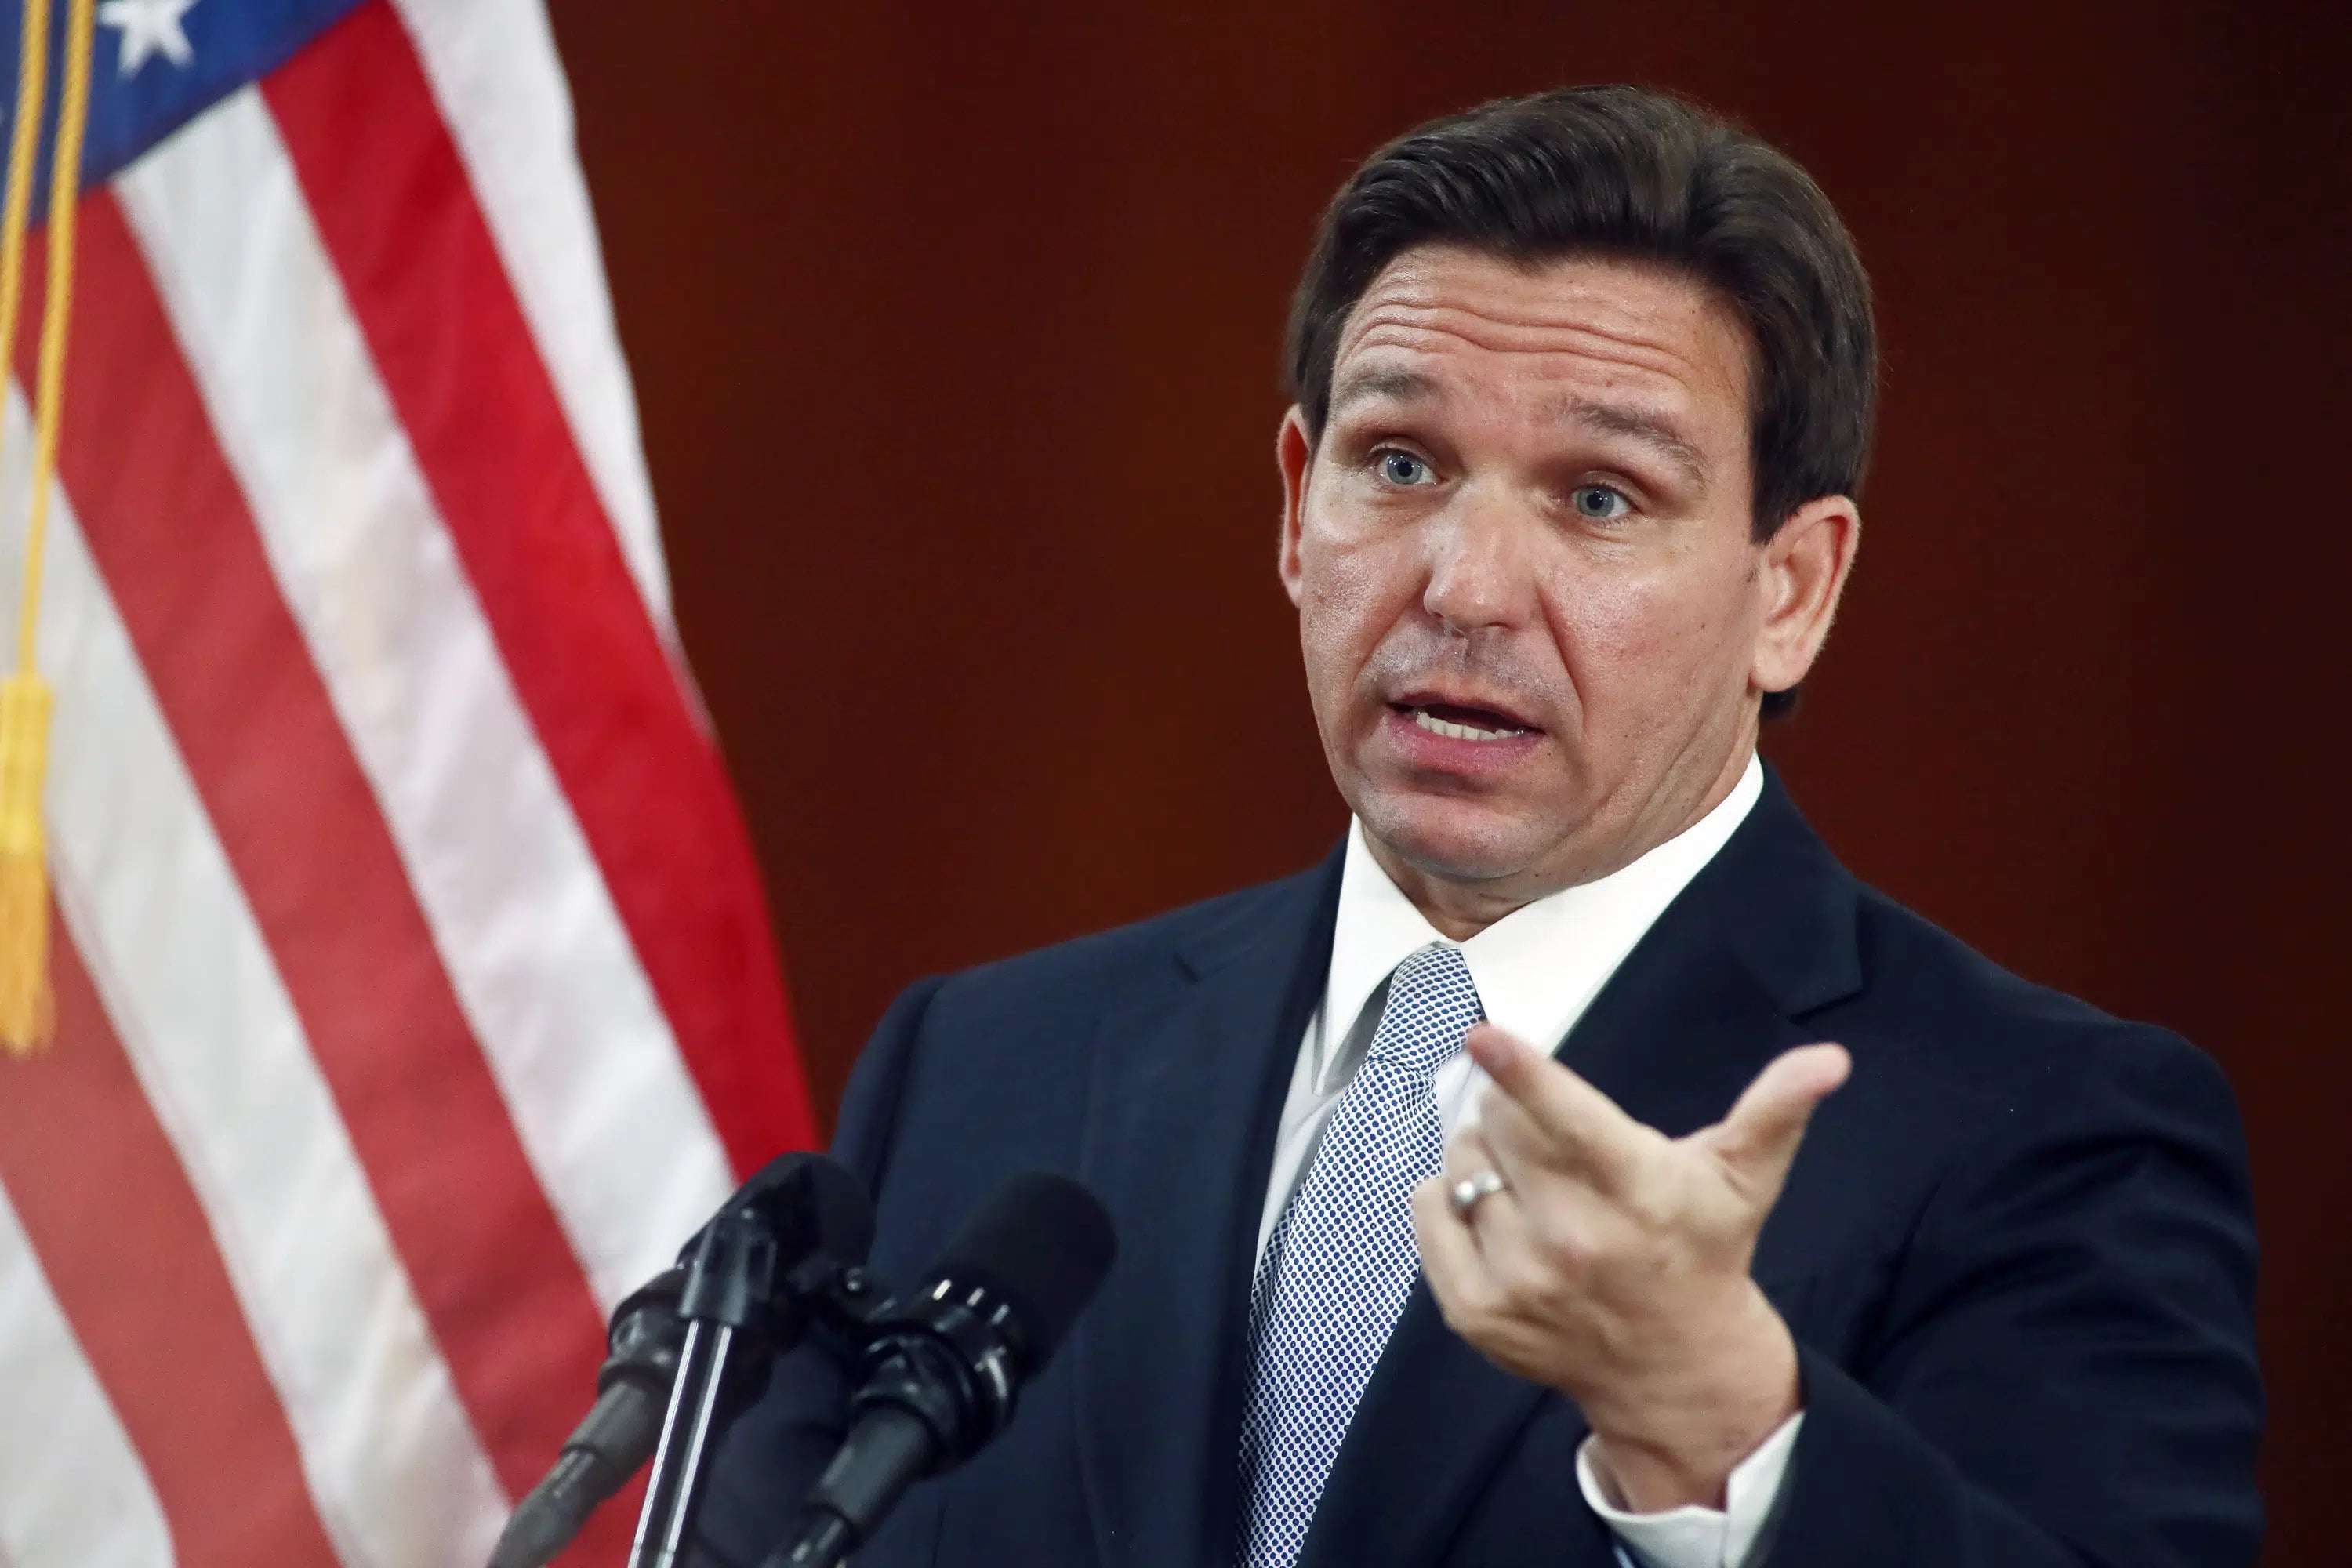 image for DeSantis to expand ‘Don’t Say Gay’ law to all grades